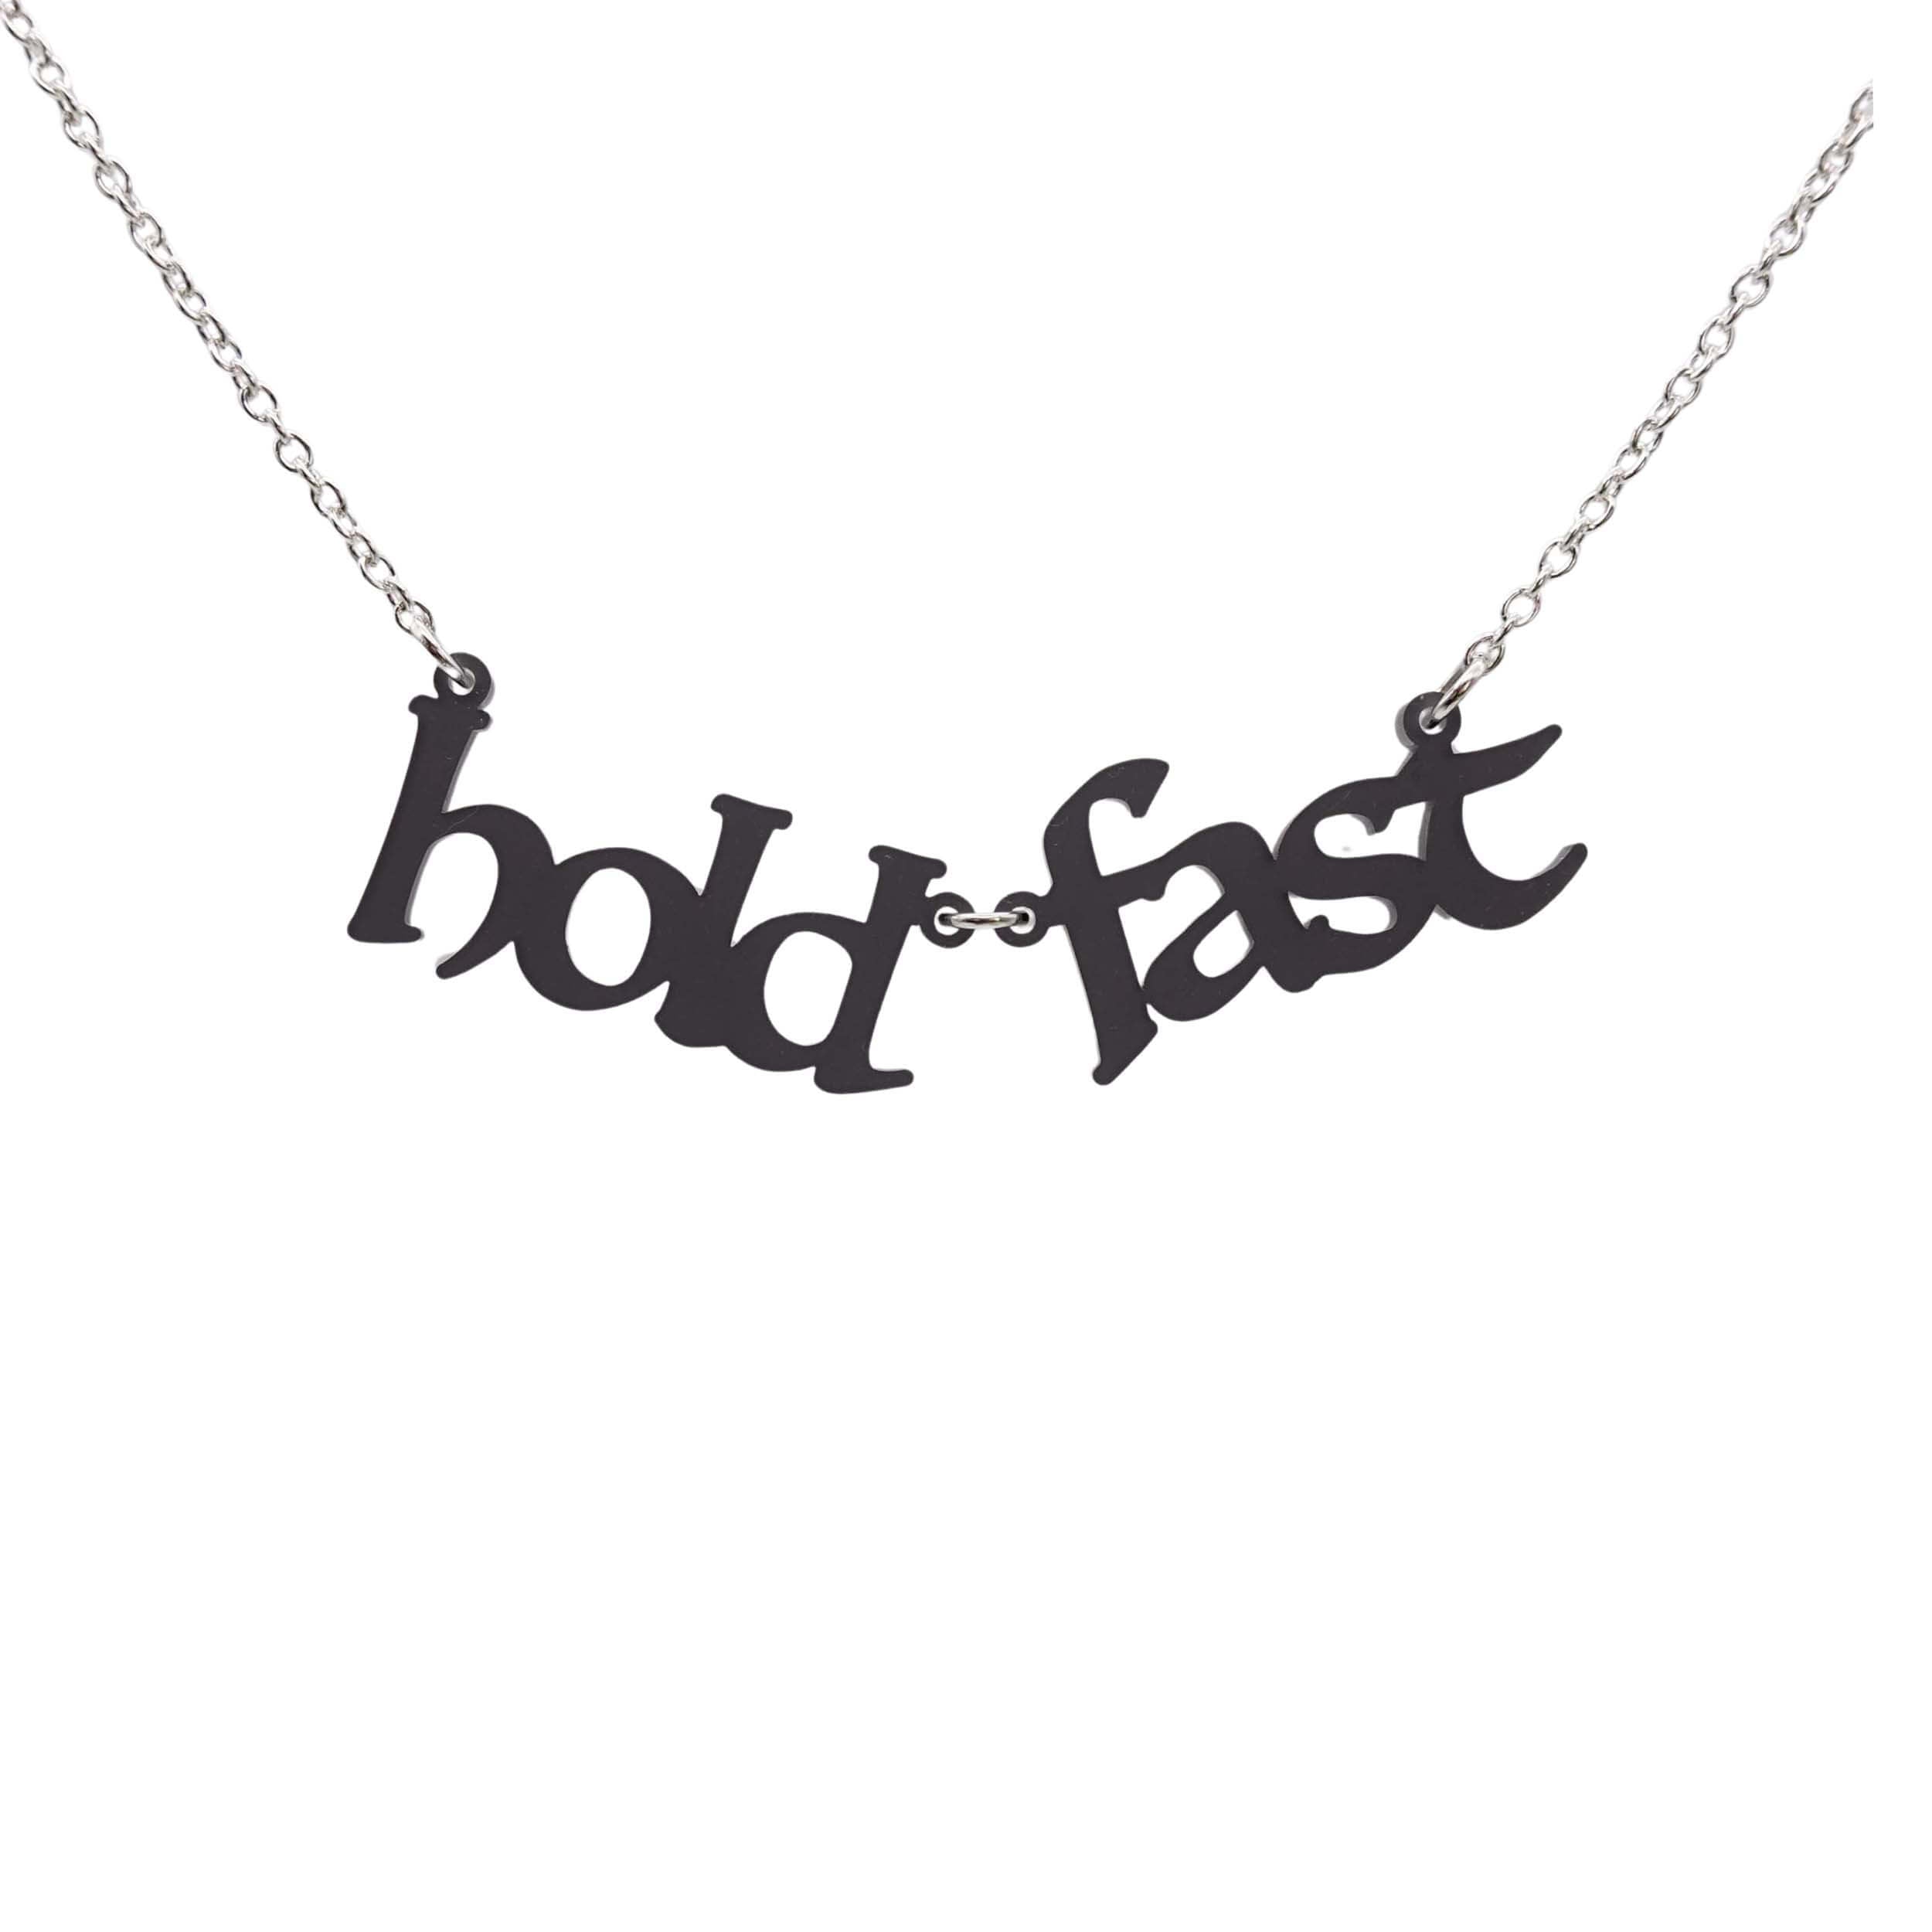 Hold Fast necklace in slate frost shown hanging against a white background. 